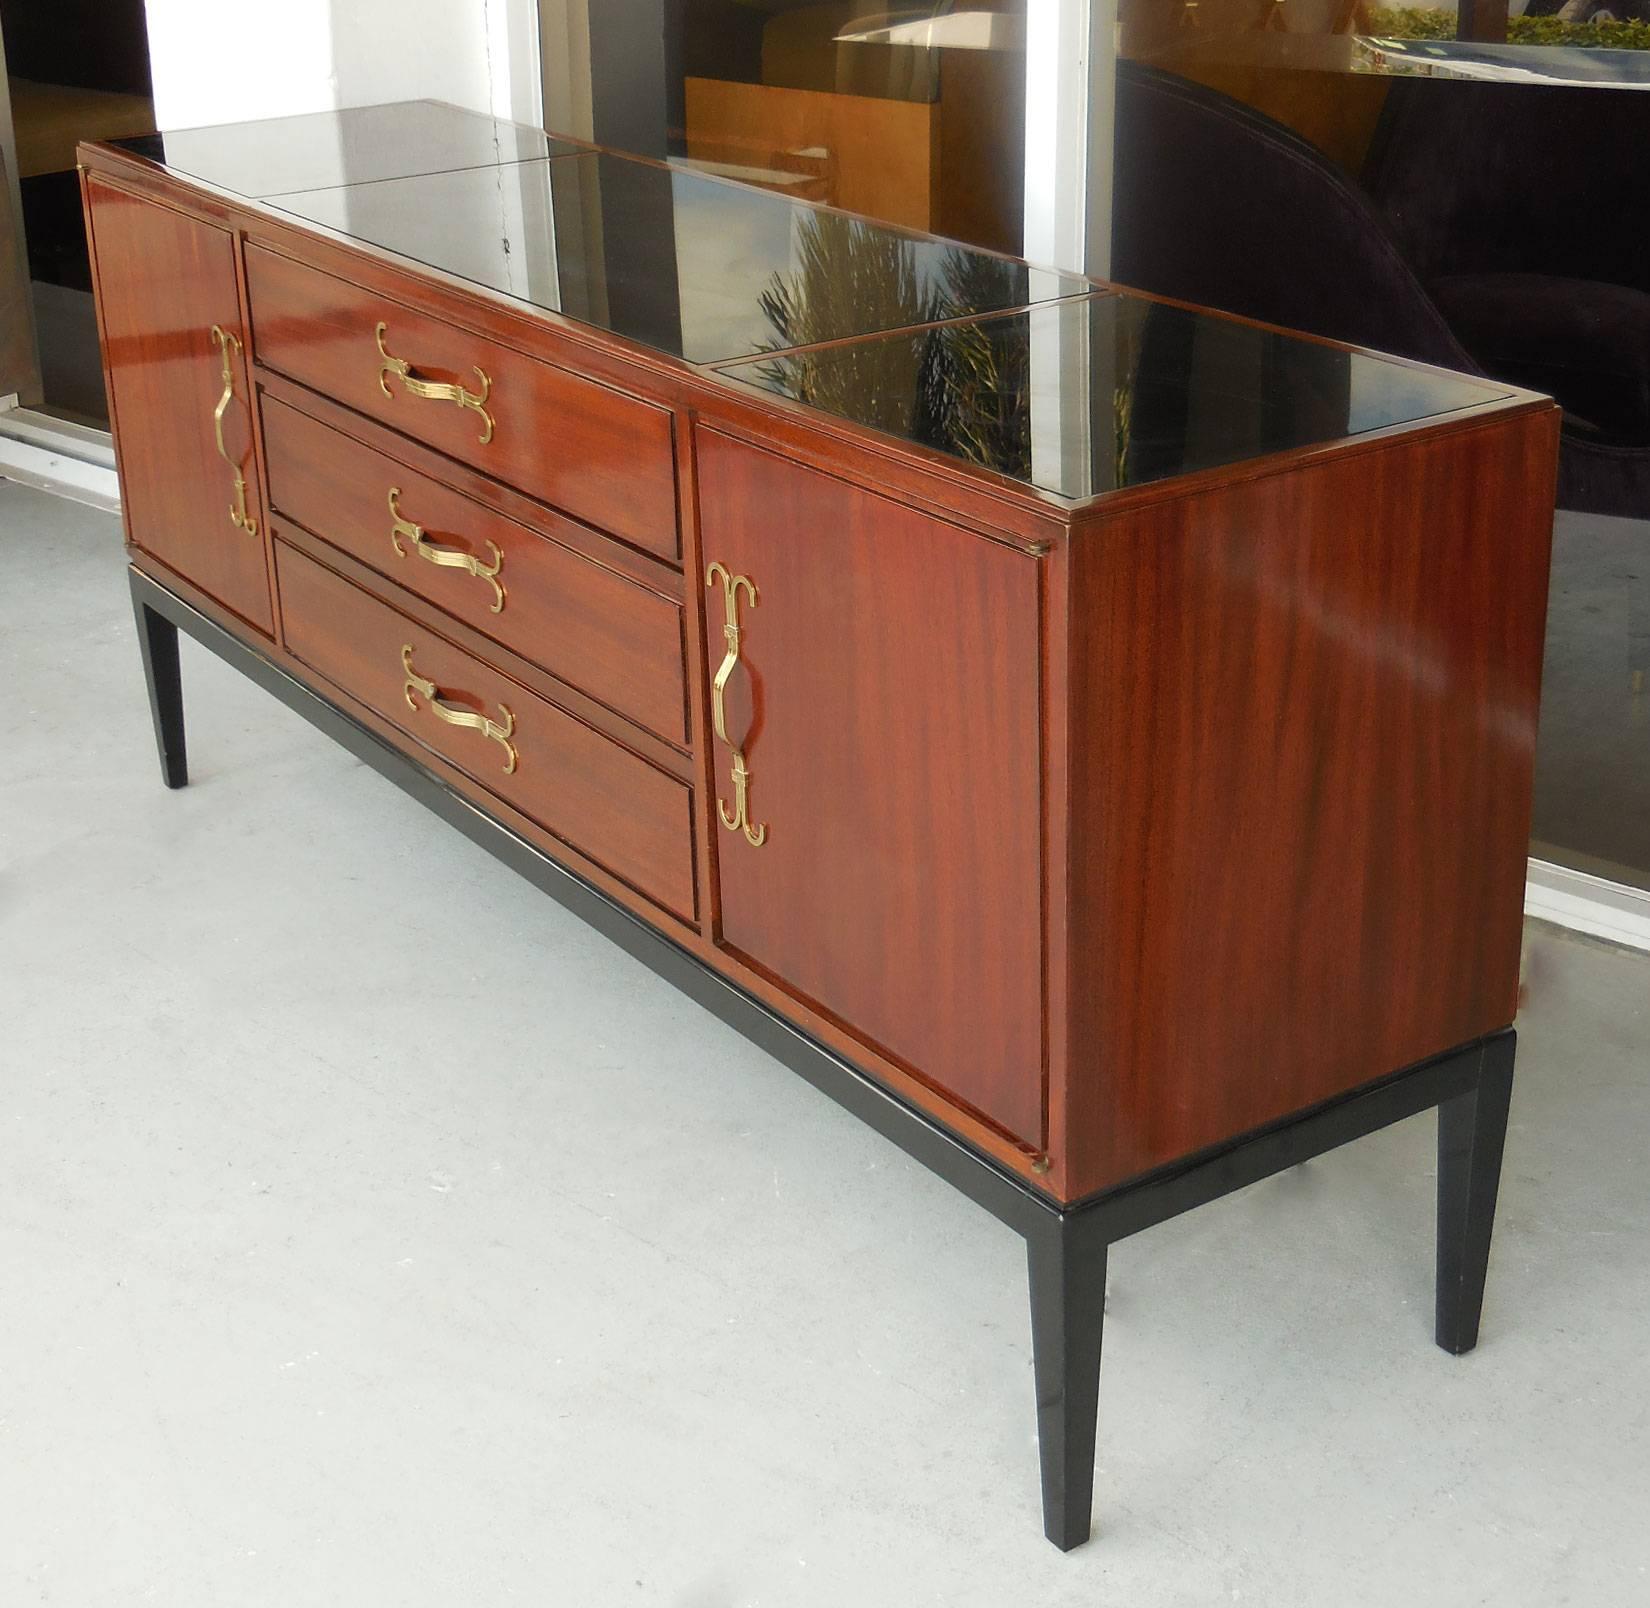 Mid-20th Century Tommi Parzinger Elegant Sideboard-Console Credenza